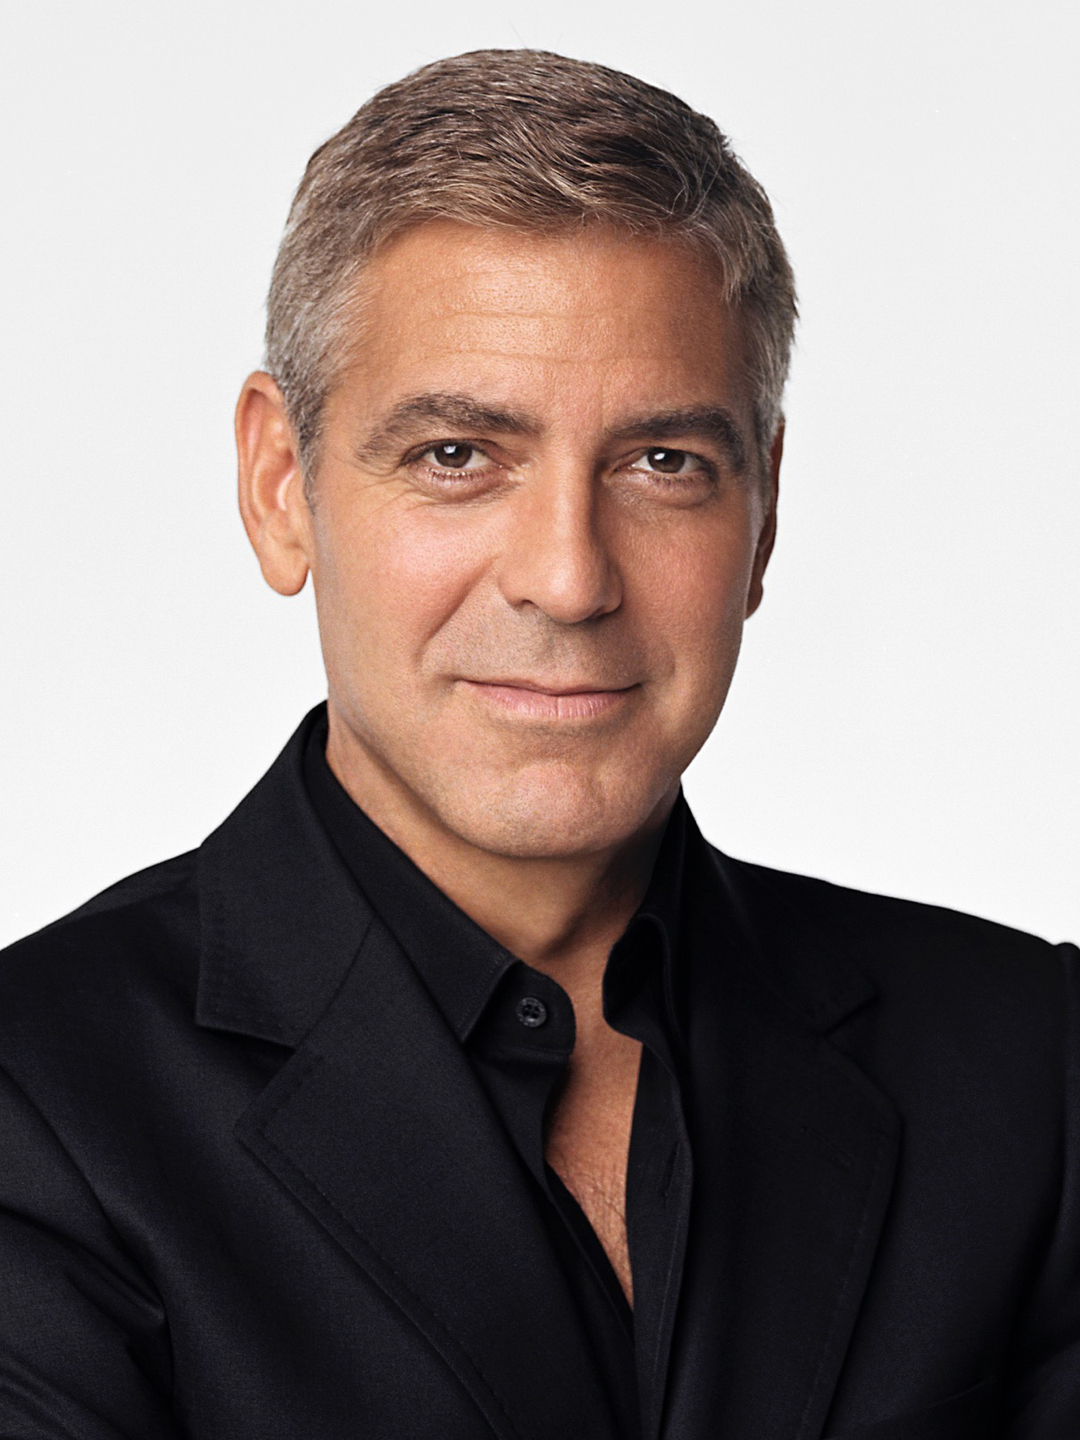 George Clooney how old is he